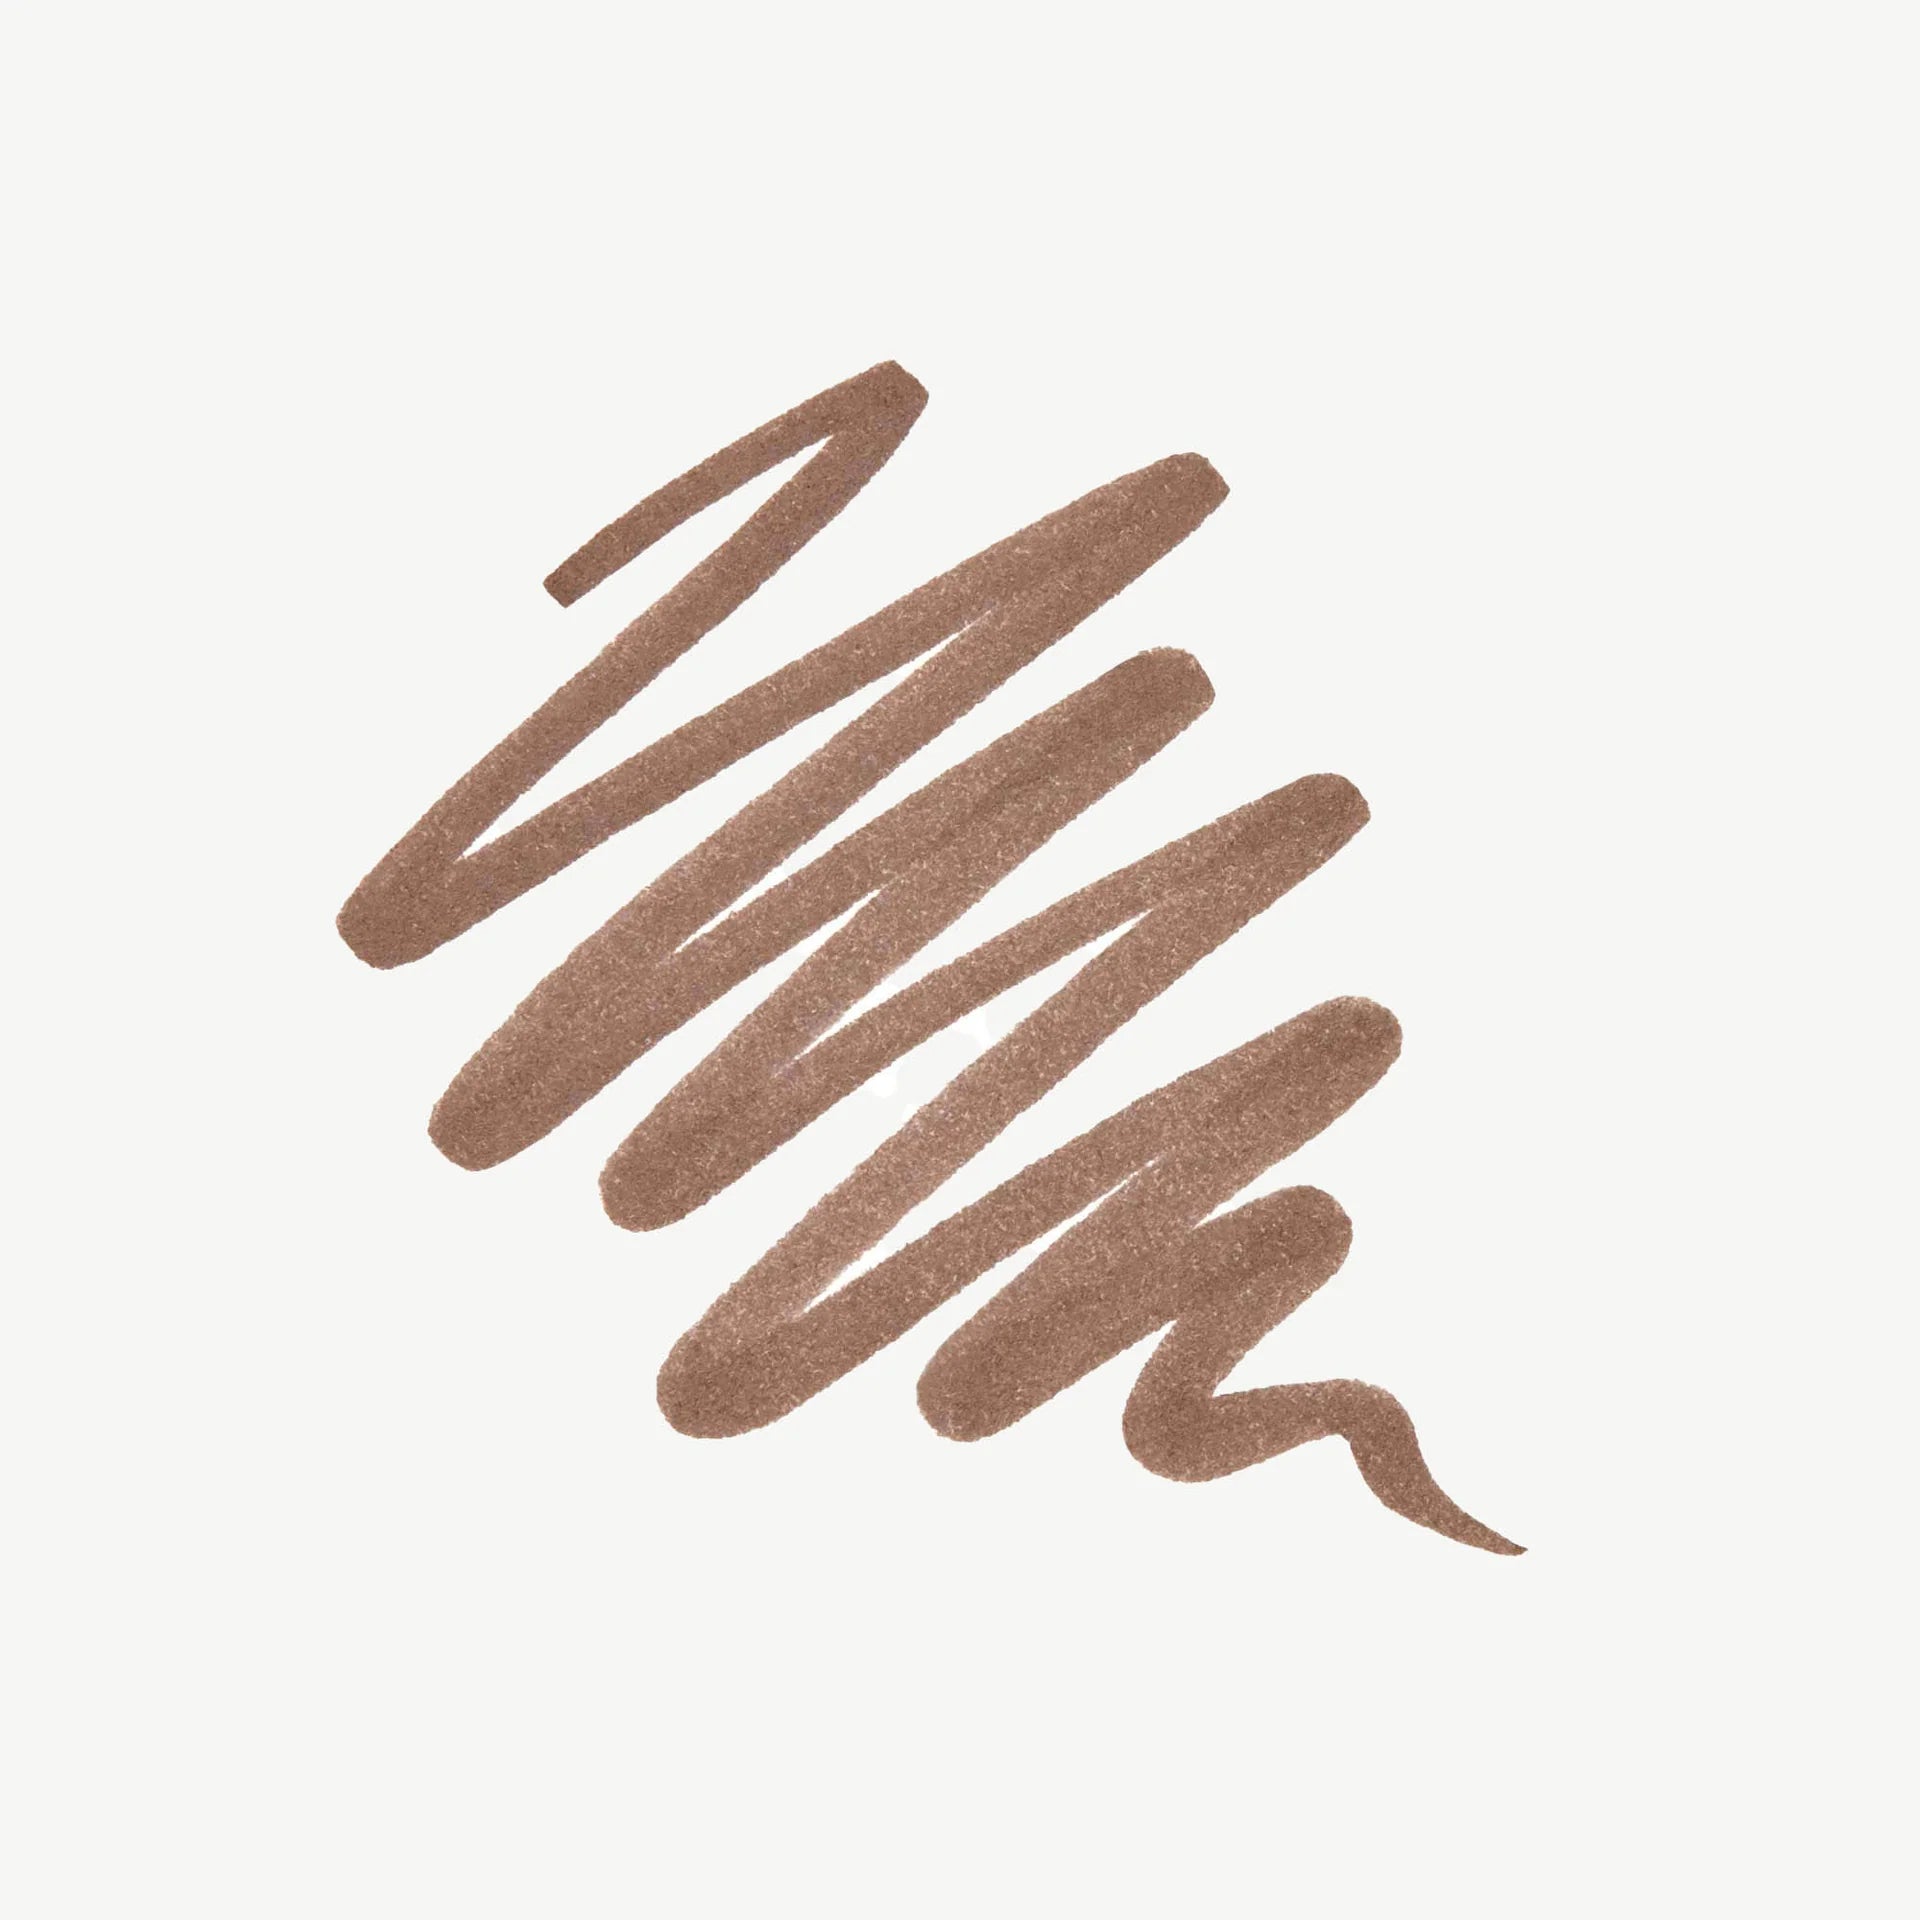 Soft Brown |Brow Pen Swatch Shade Soft Brown